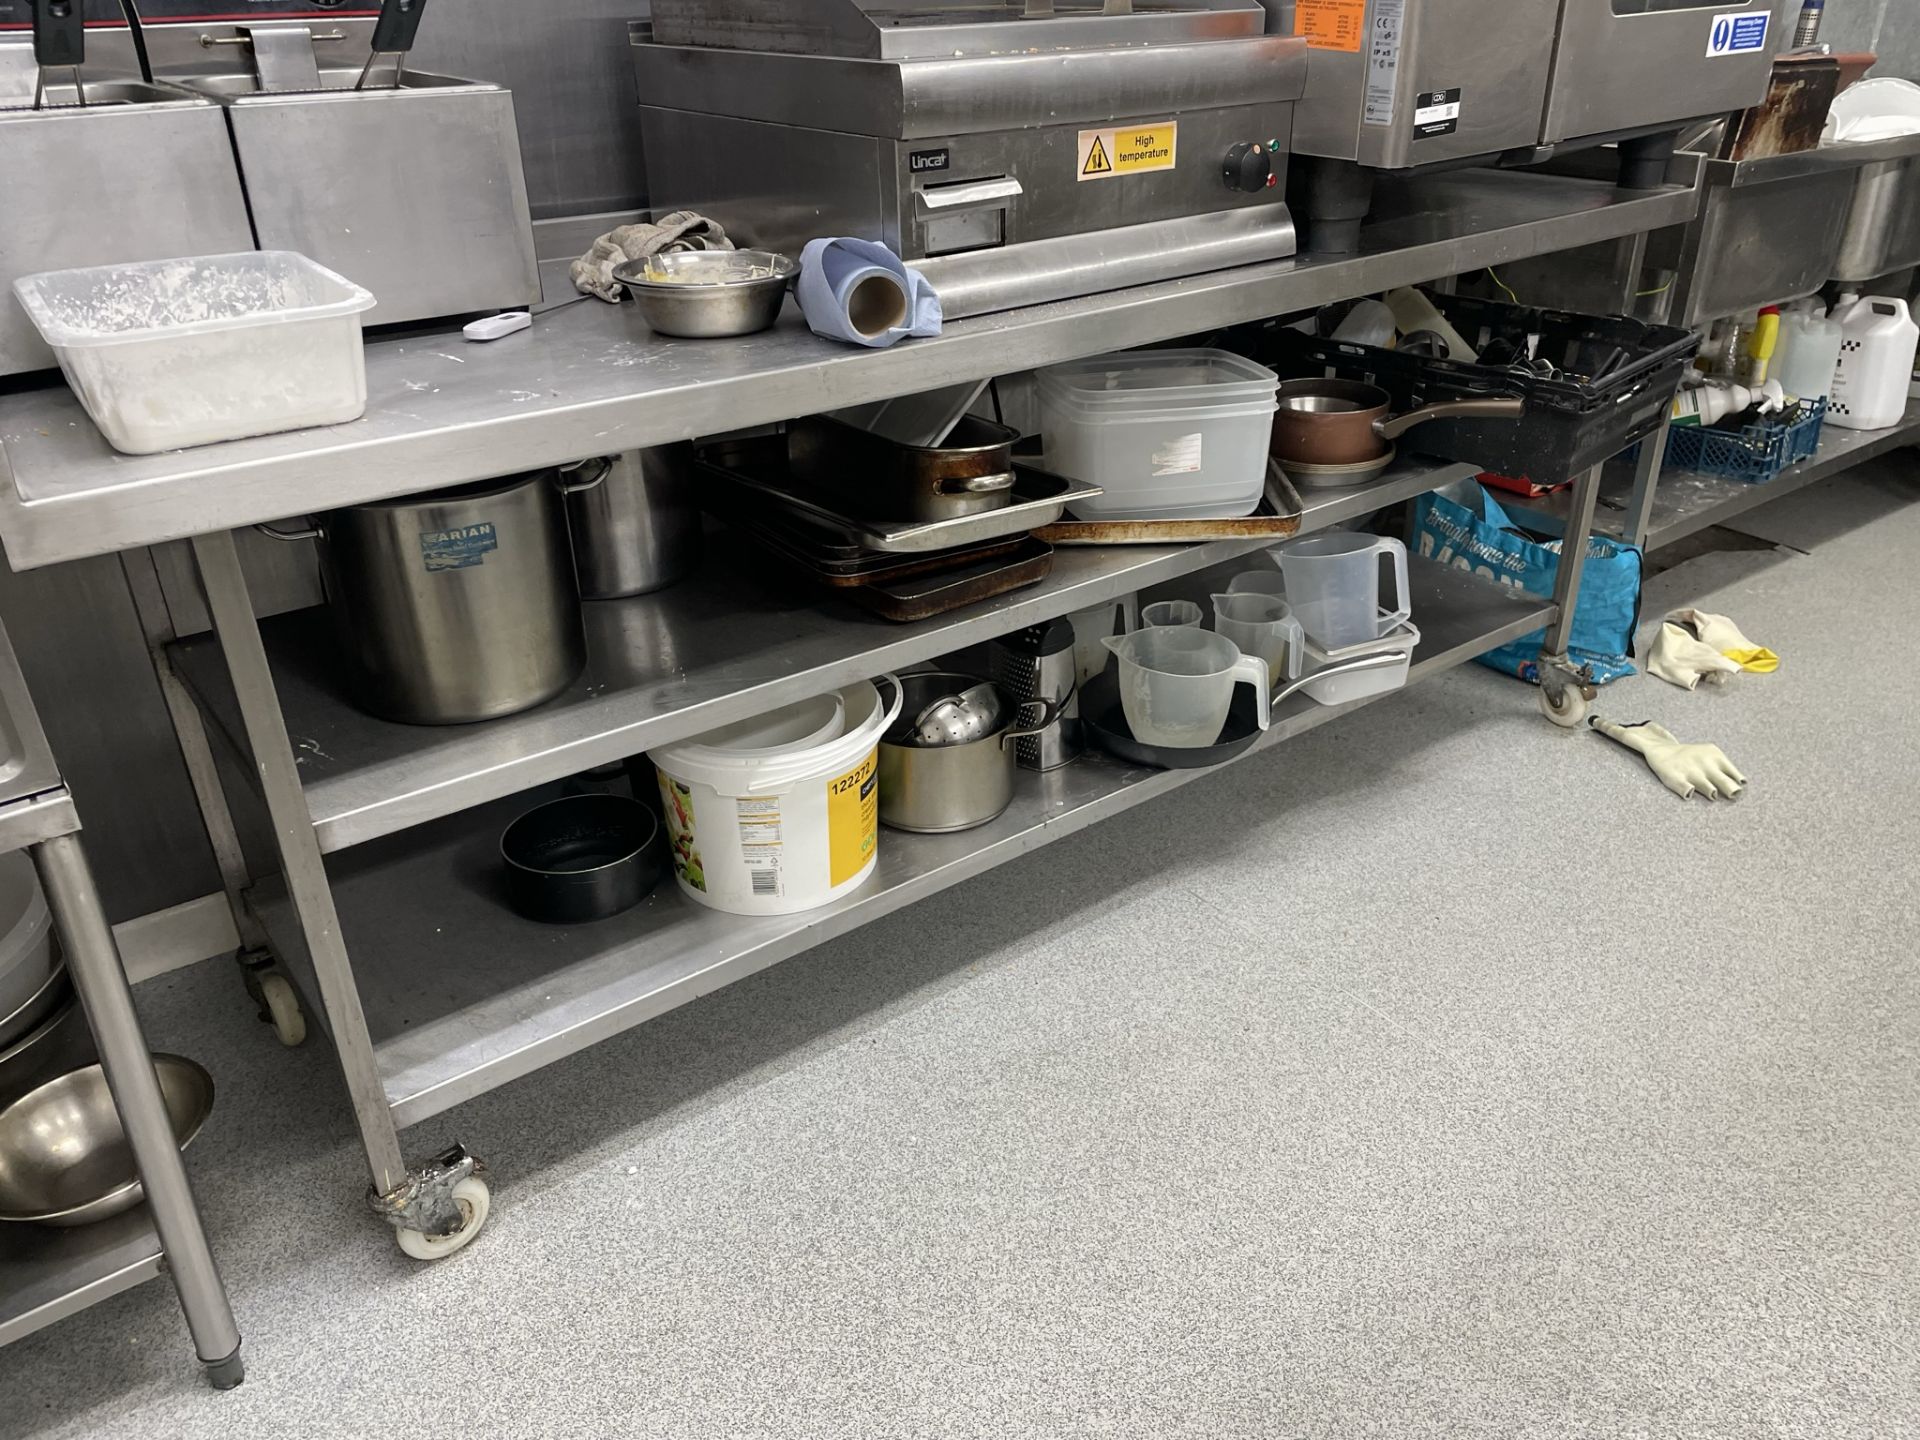 Mobile Stainless Steel Preparation Table w/ 2 x Undershelves - Image 2 of 2